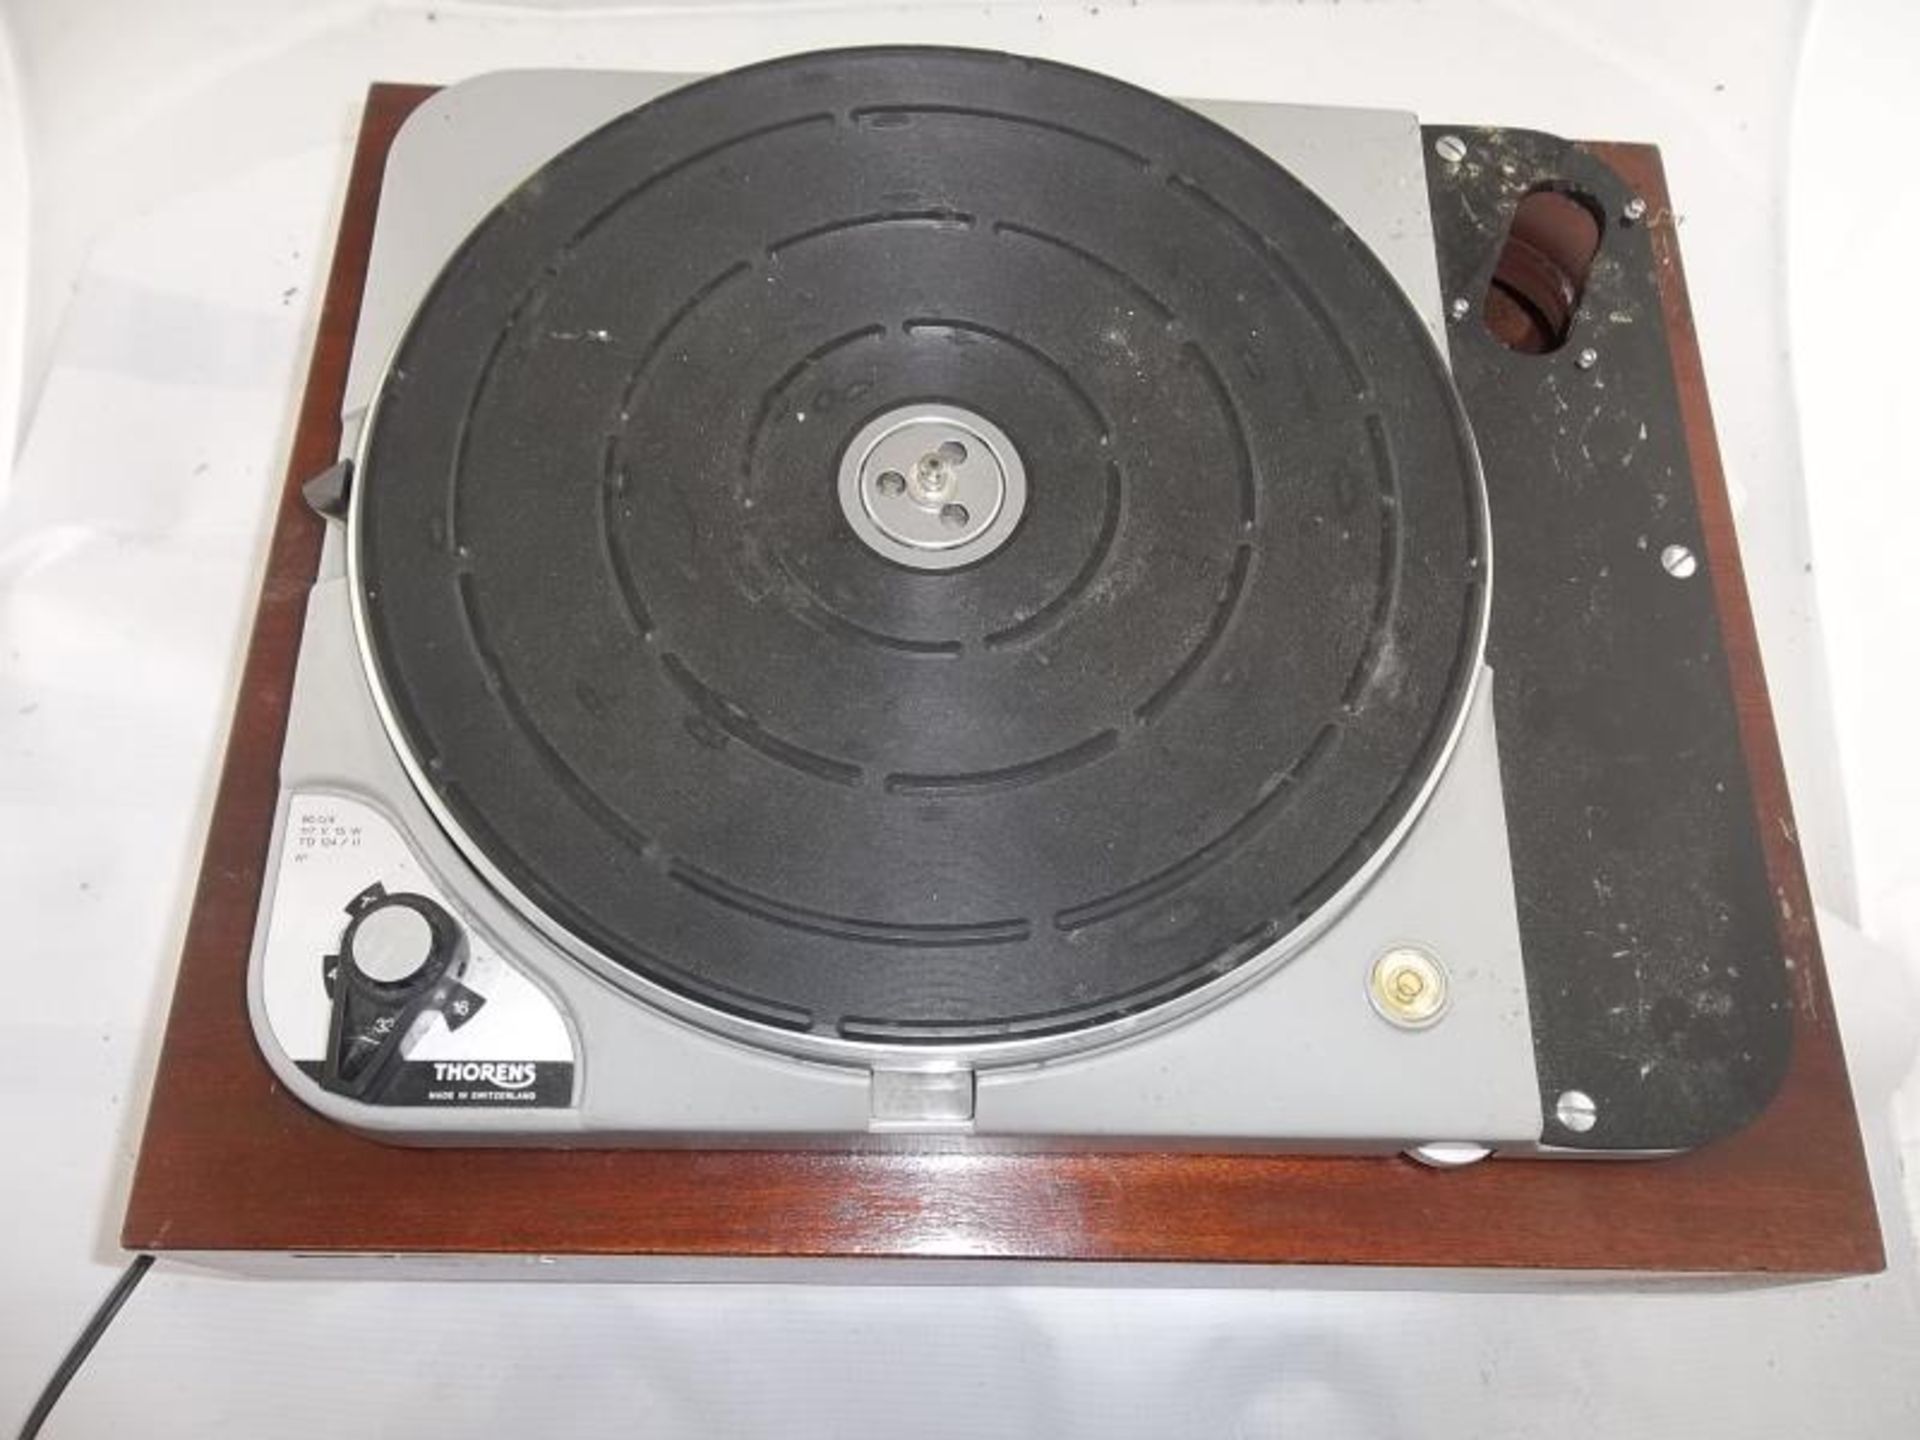 Thorens TD 124/11 turntable, # 76062, made in Switzerland, no arm, 16, 33, 45 or 78 - Image 2 of 5